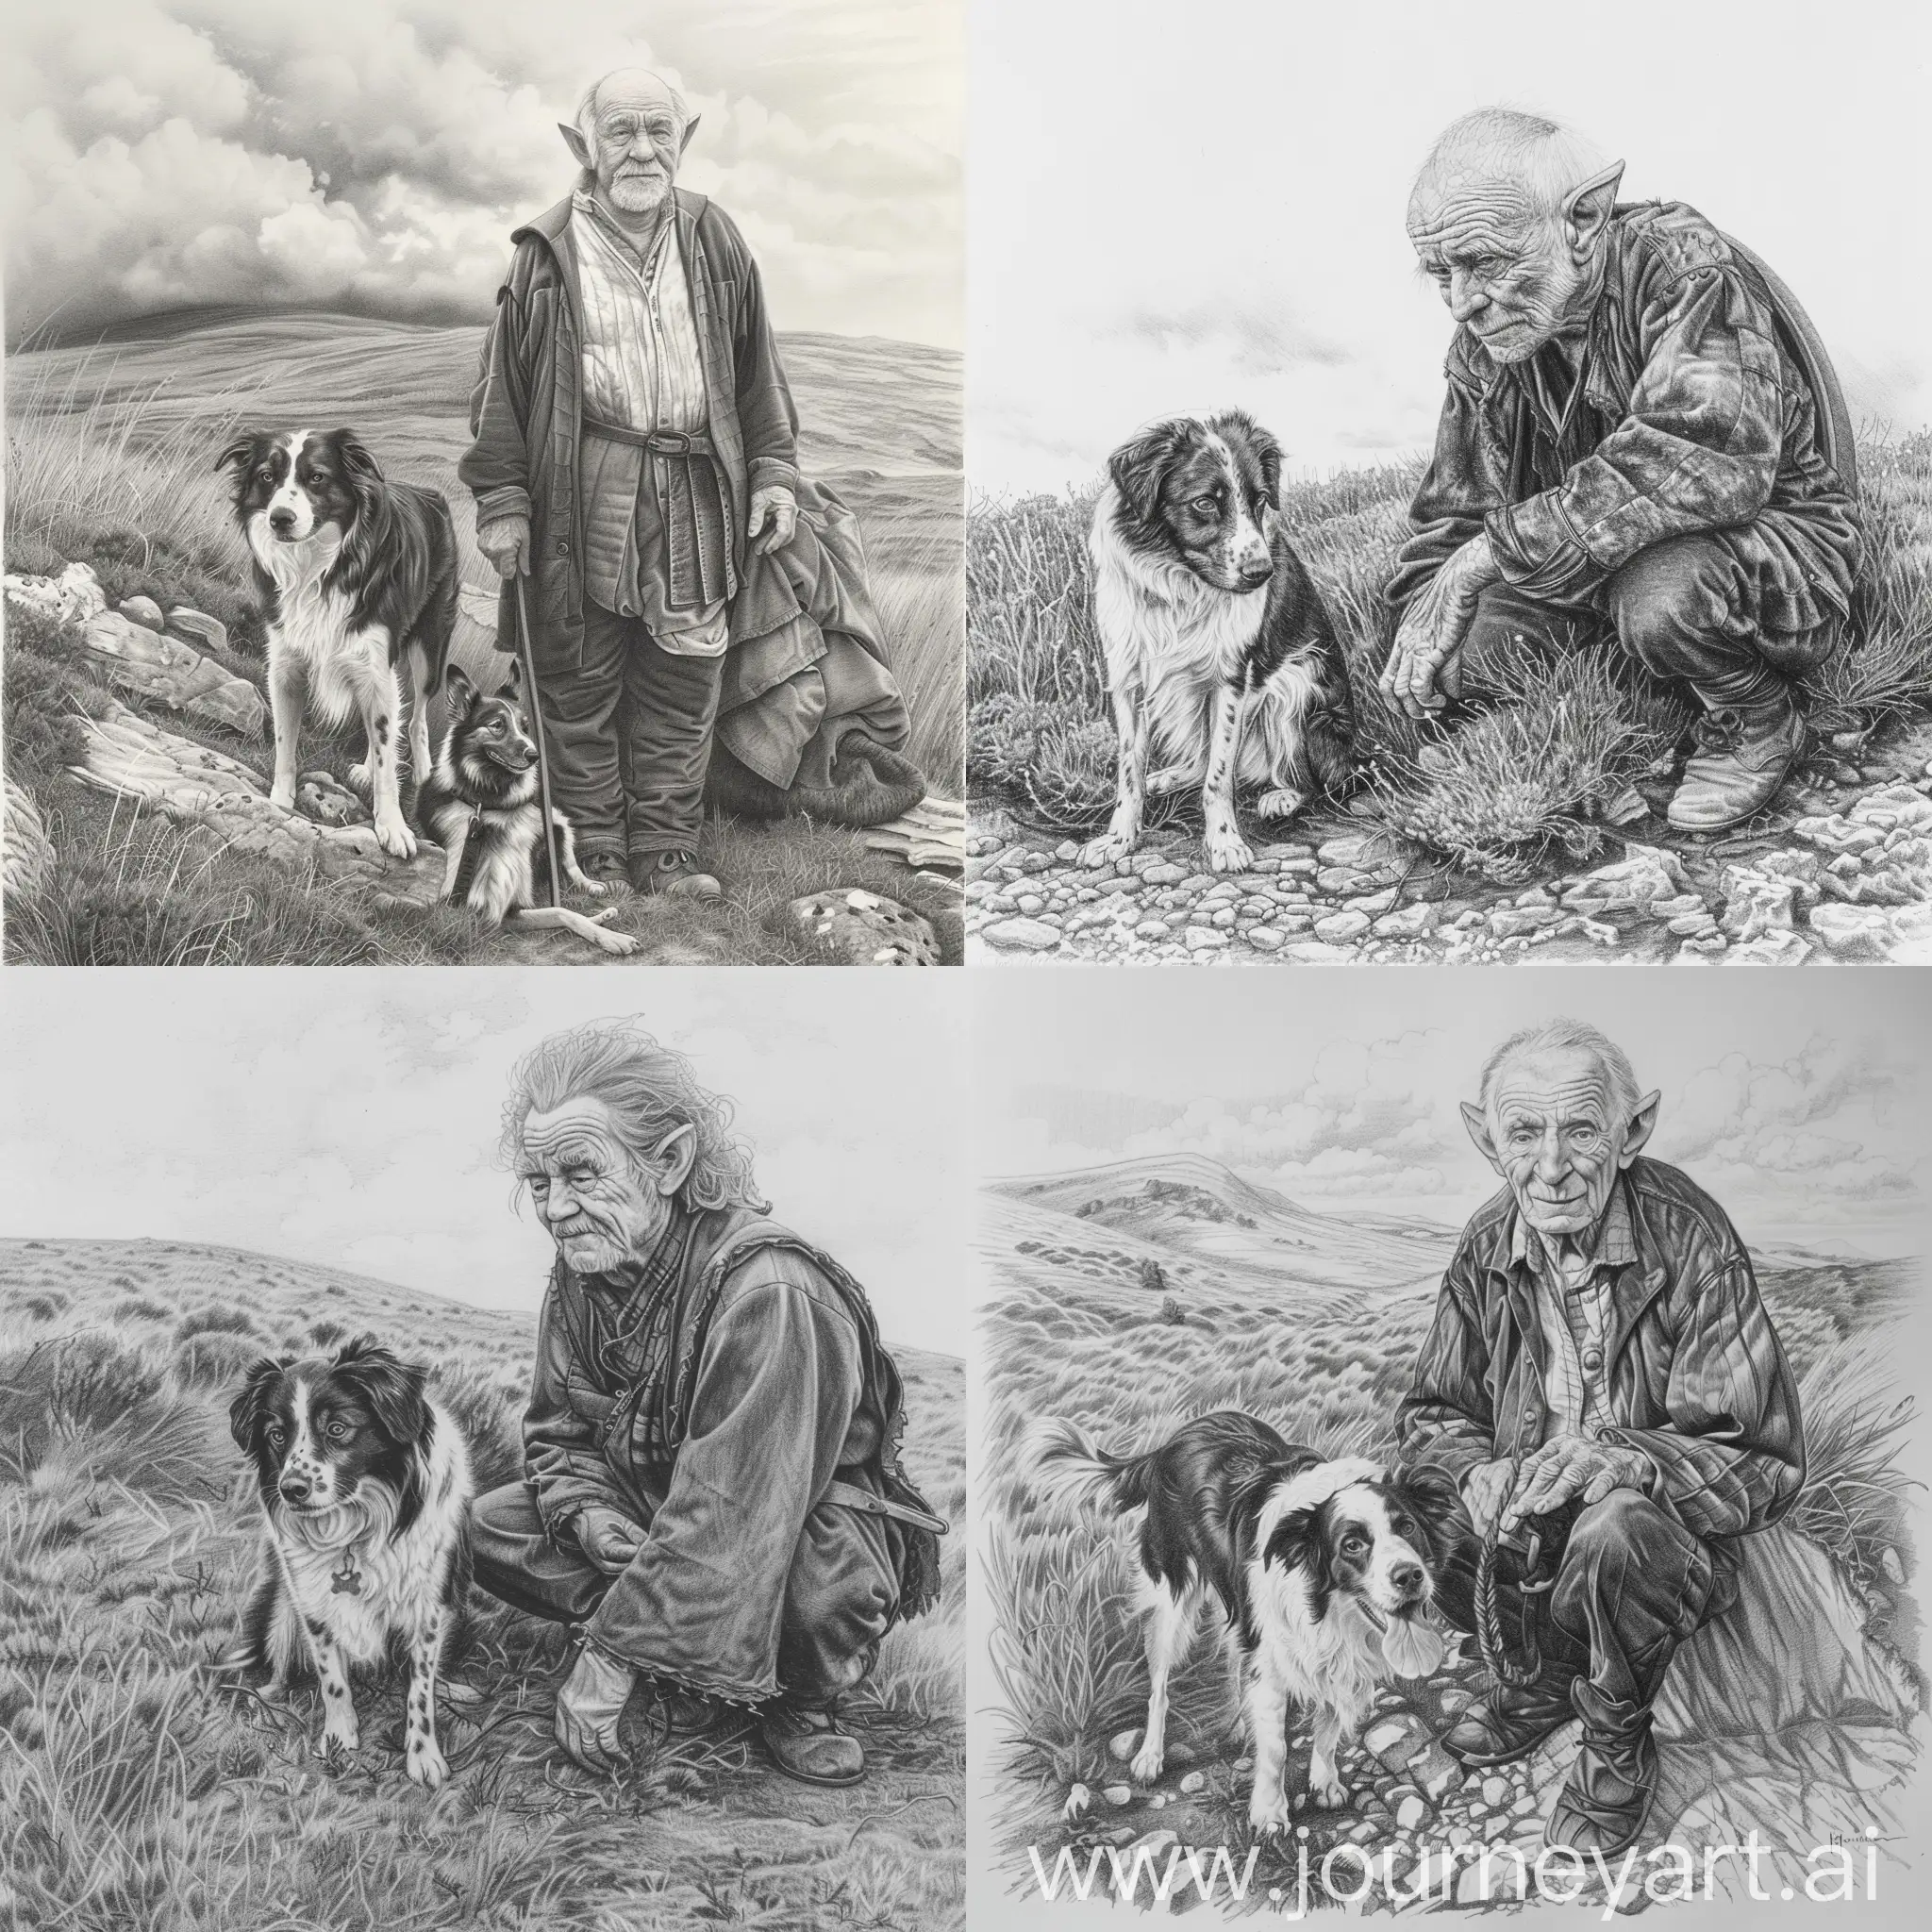 pencil drawing, a middle-aged, clean-shaven hobbit with border collie on the moorland